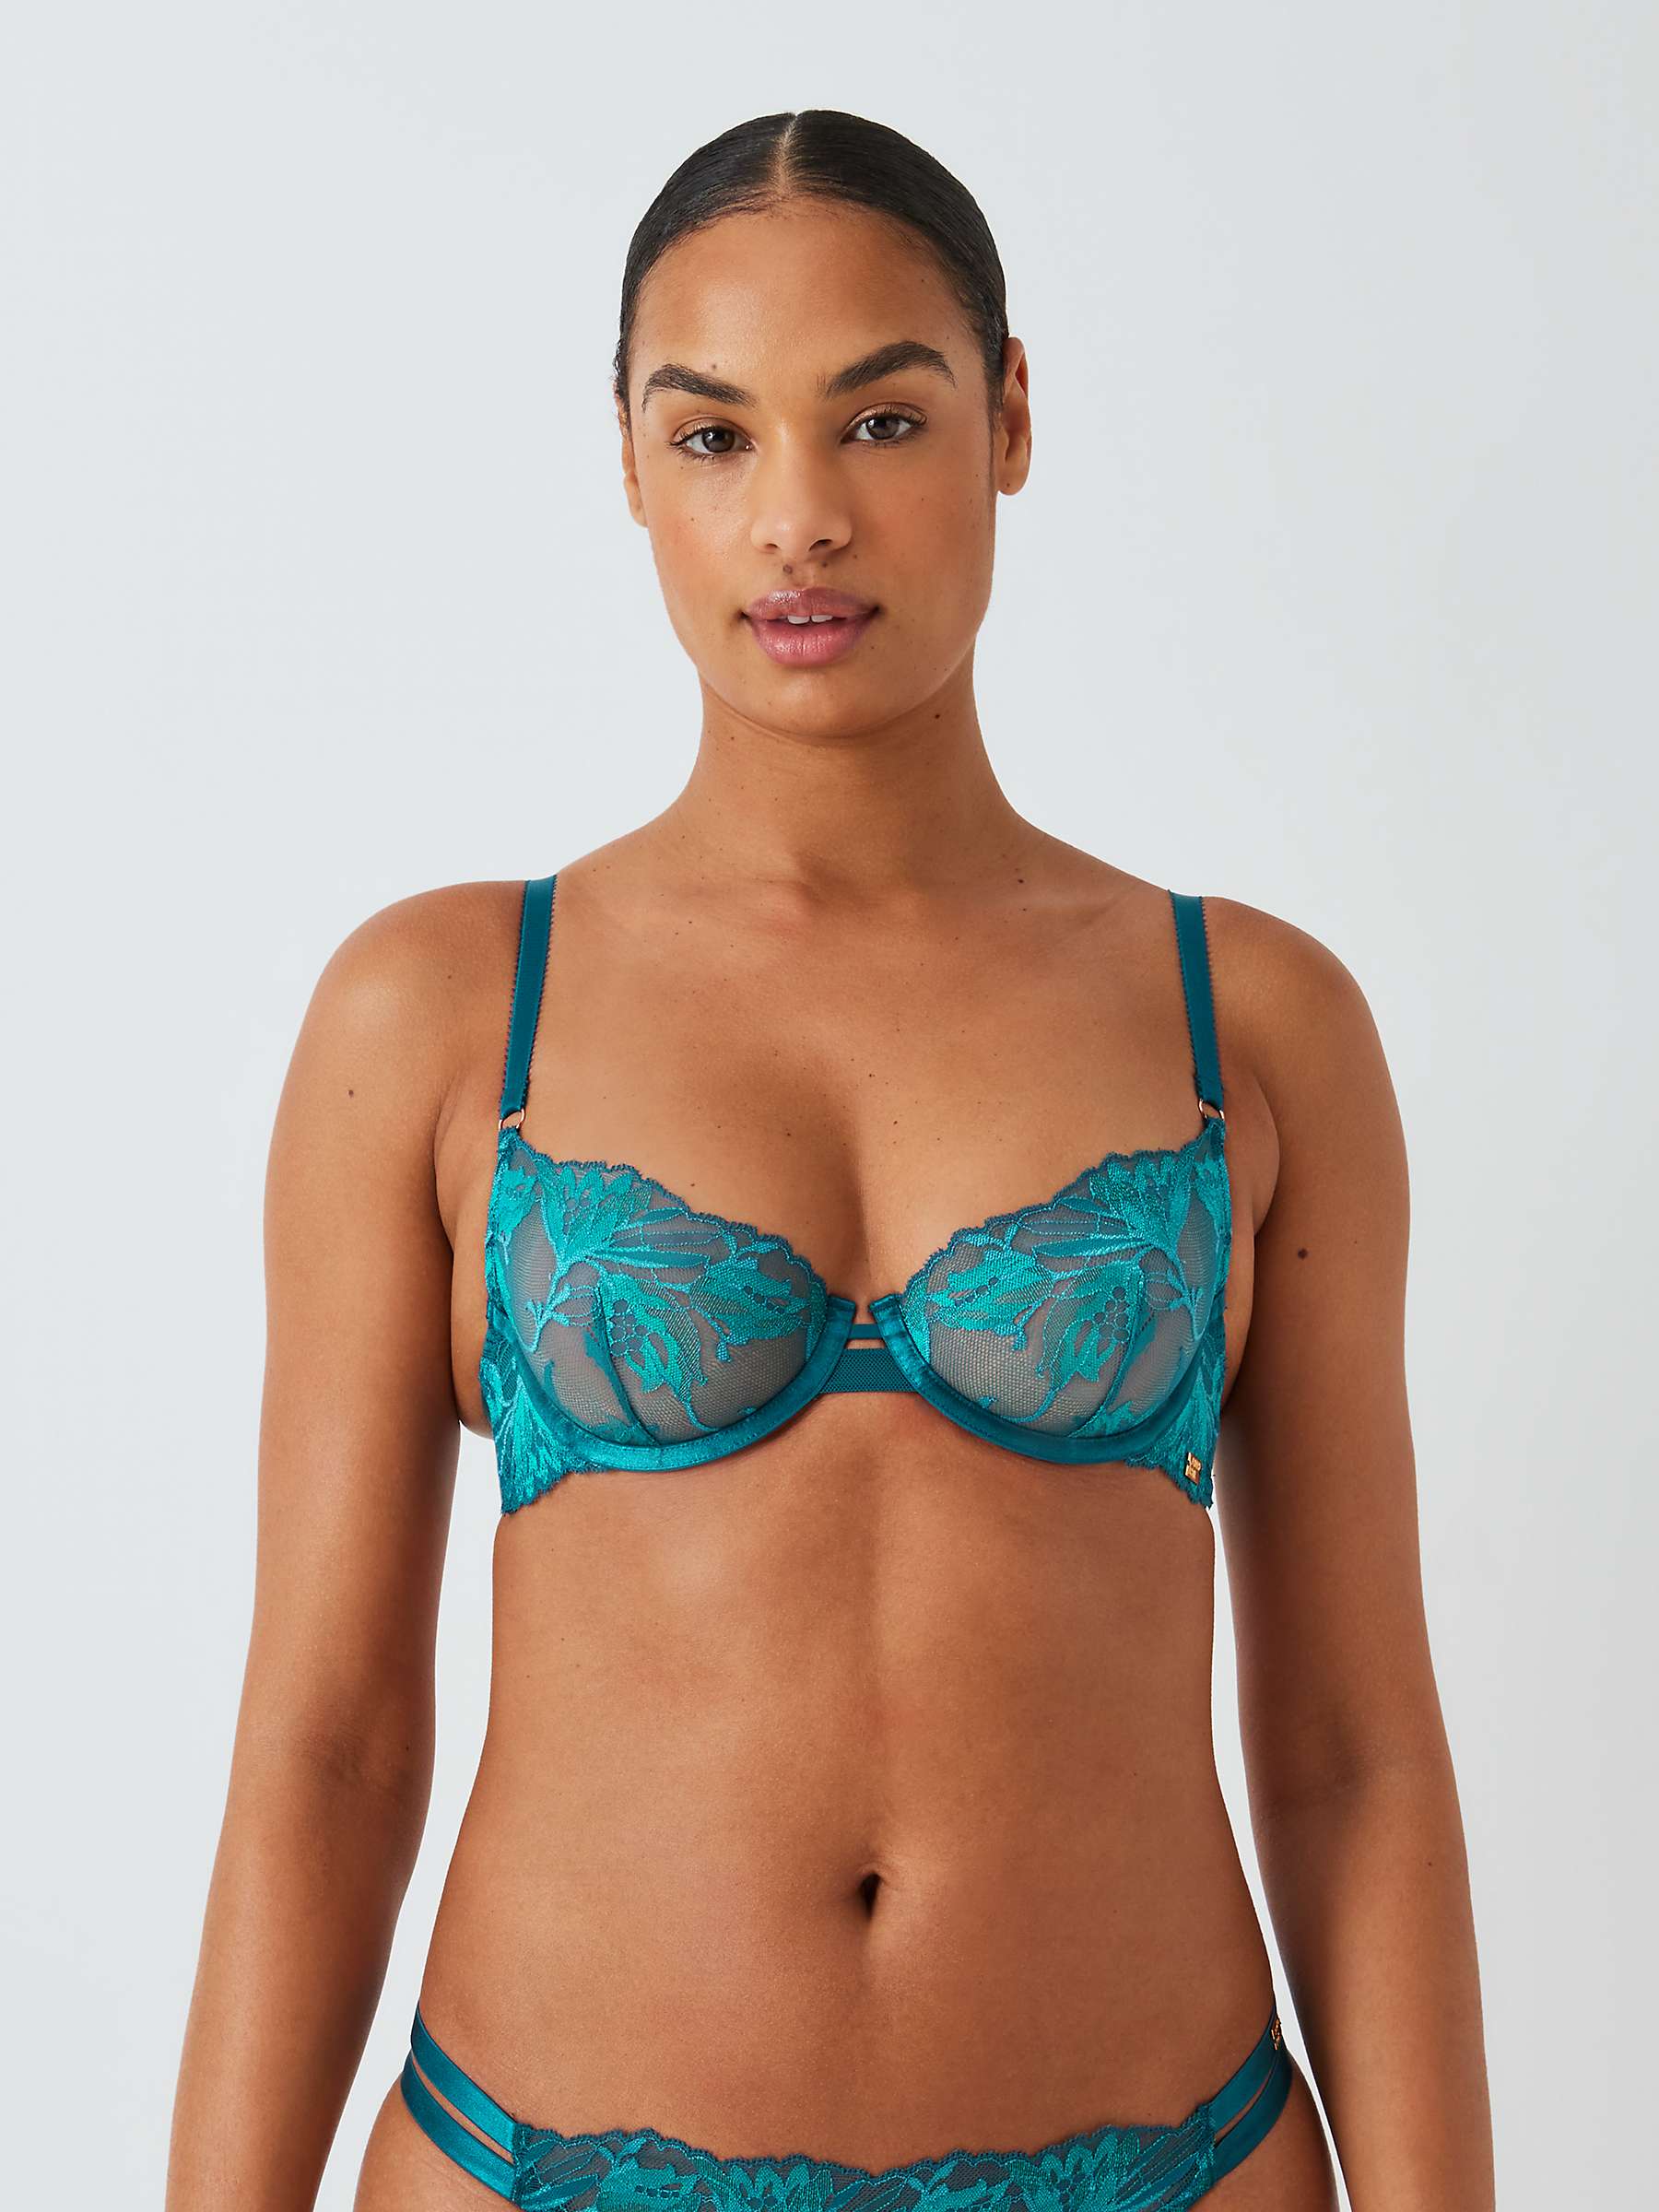 AND/OR Wren Lace Underwired Plunge Bra, B-F Cup Sizes, Coral at